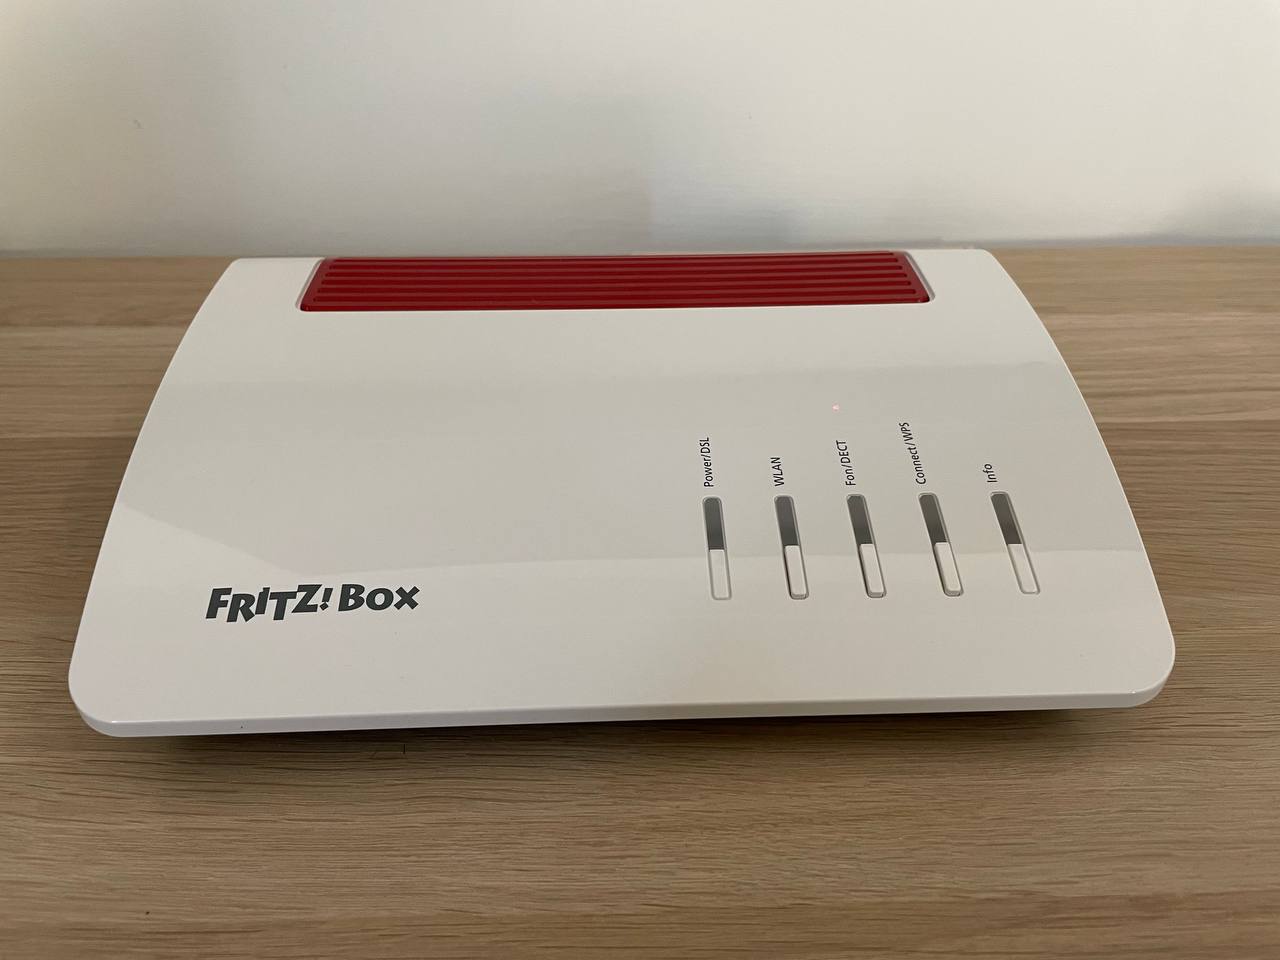 Fritz! Box 7590 AX review: top coverage and functions